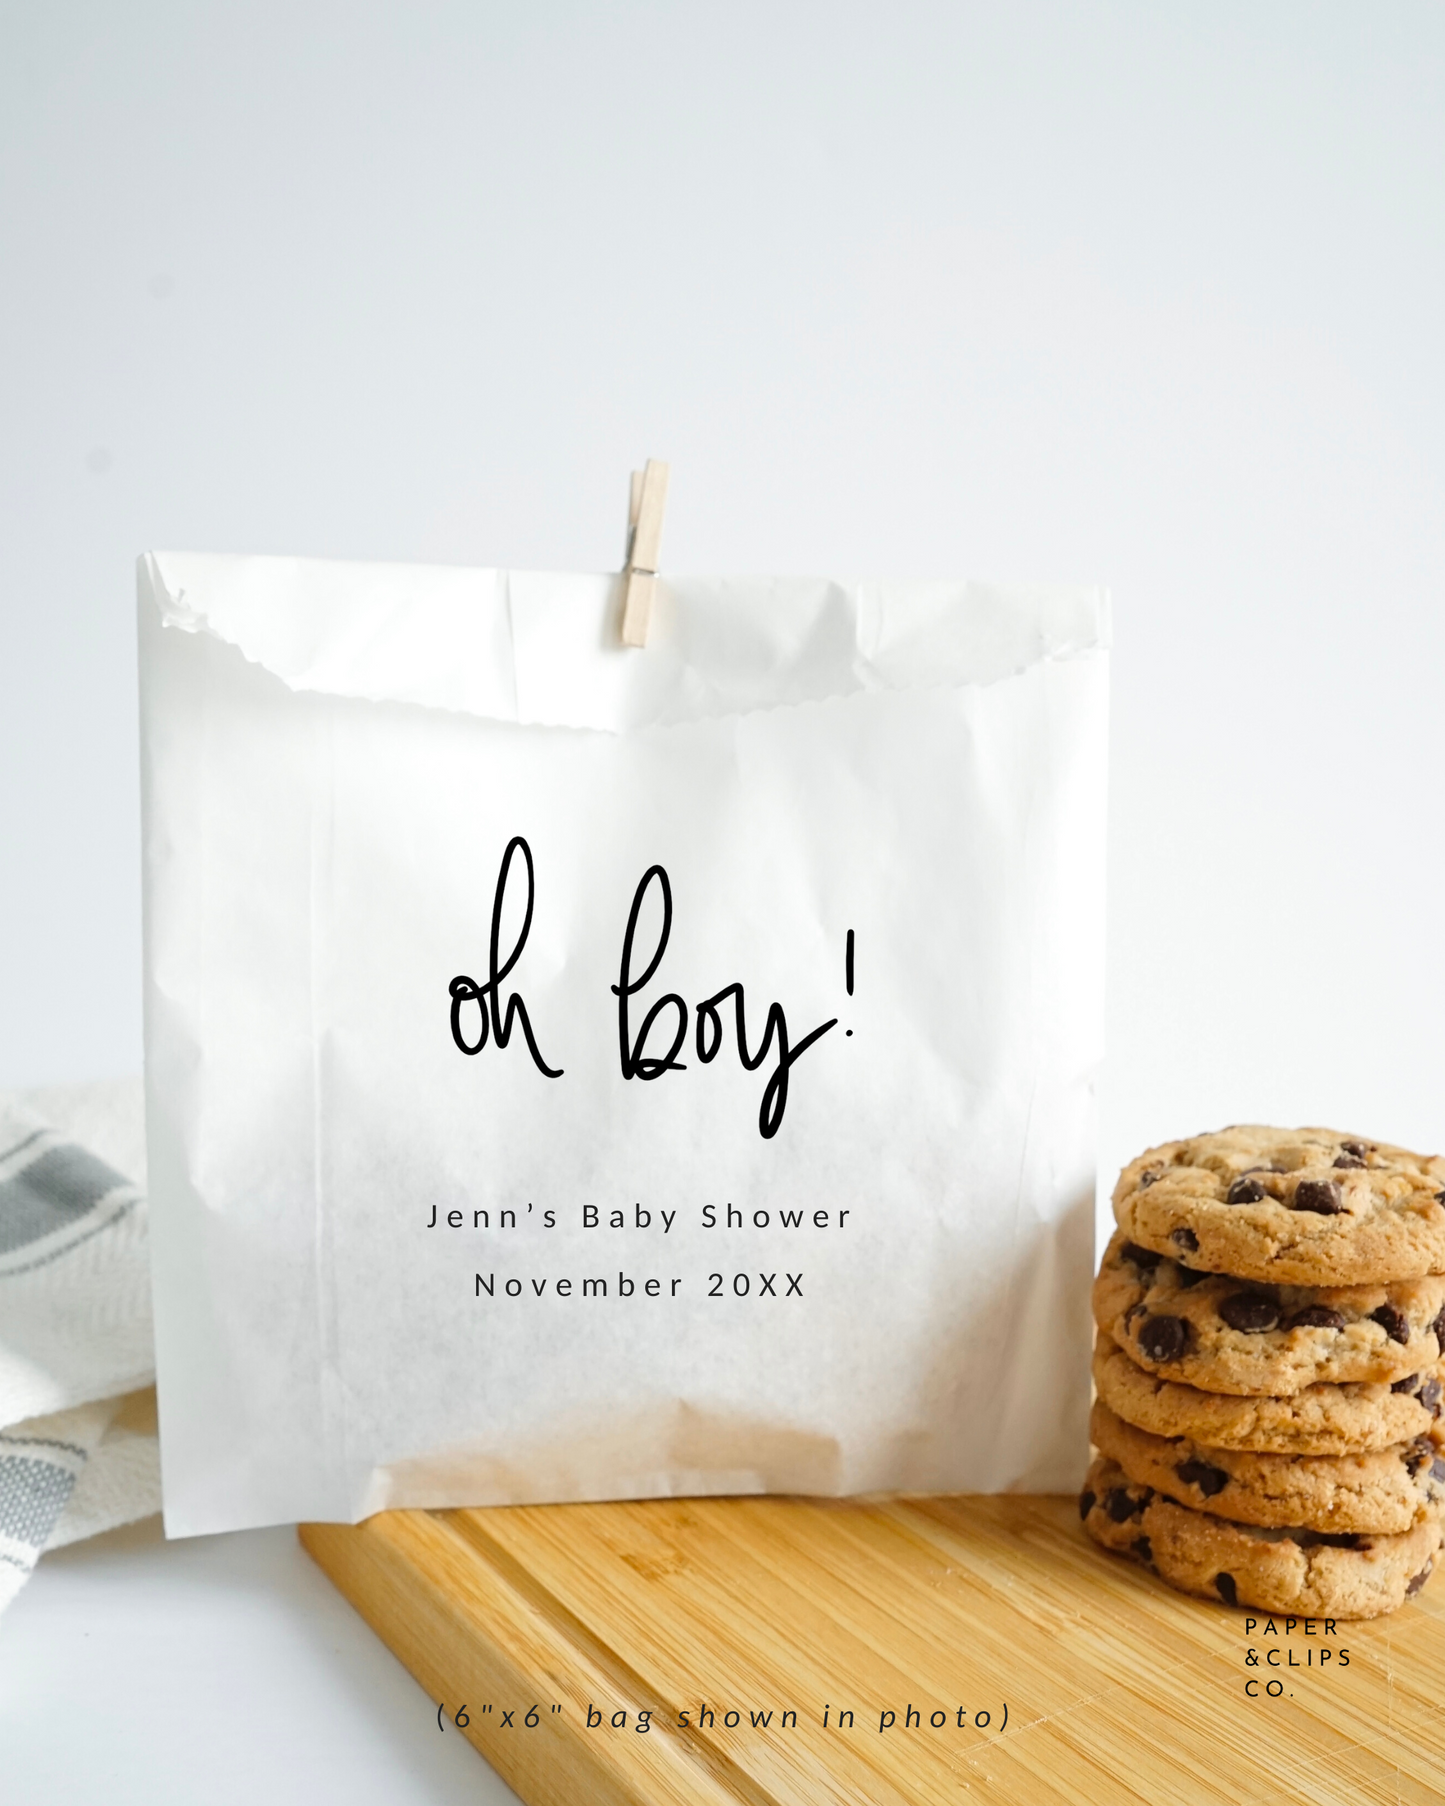 Oh Boy! - White Party Bags